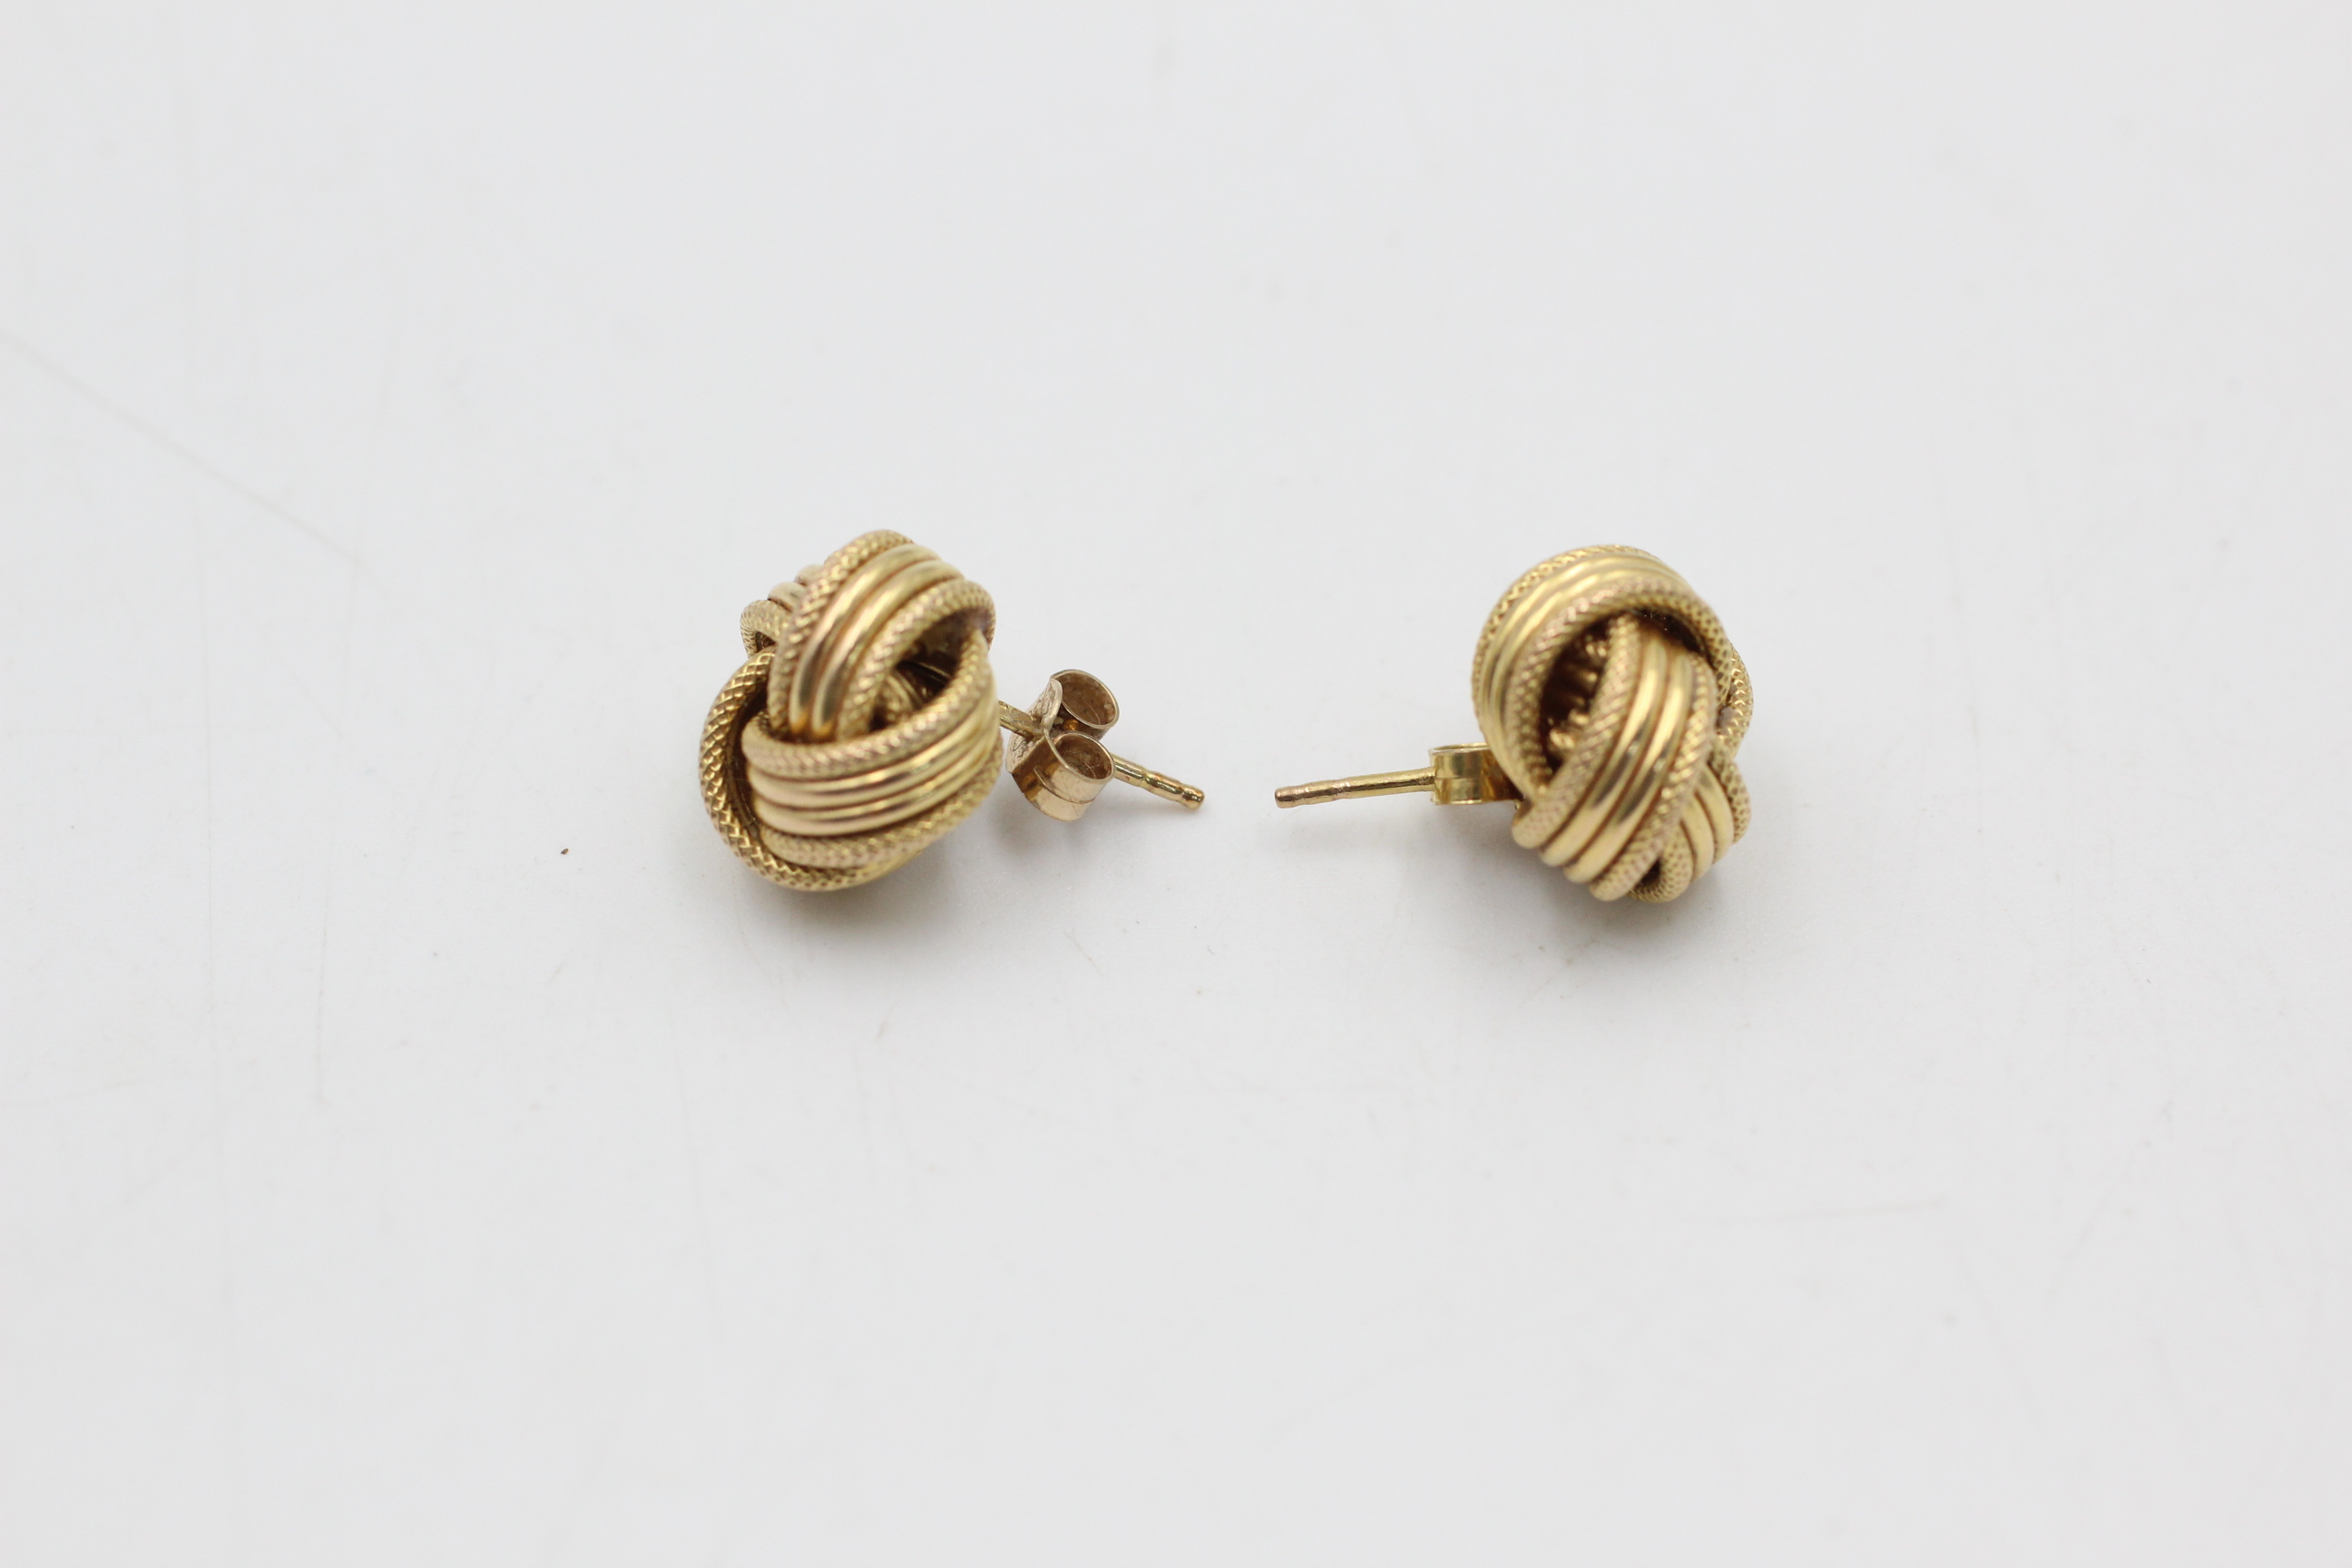 9ct gold textured knot stud earrings (3.3g) - Image 2 of 4